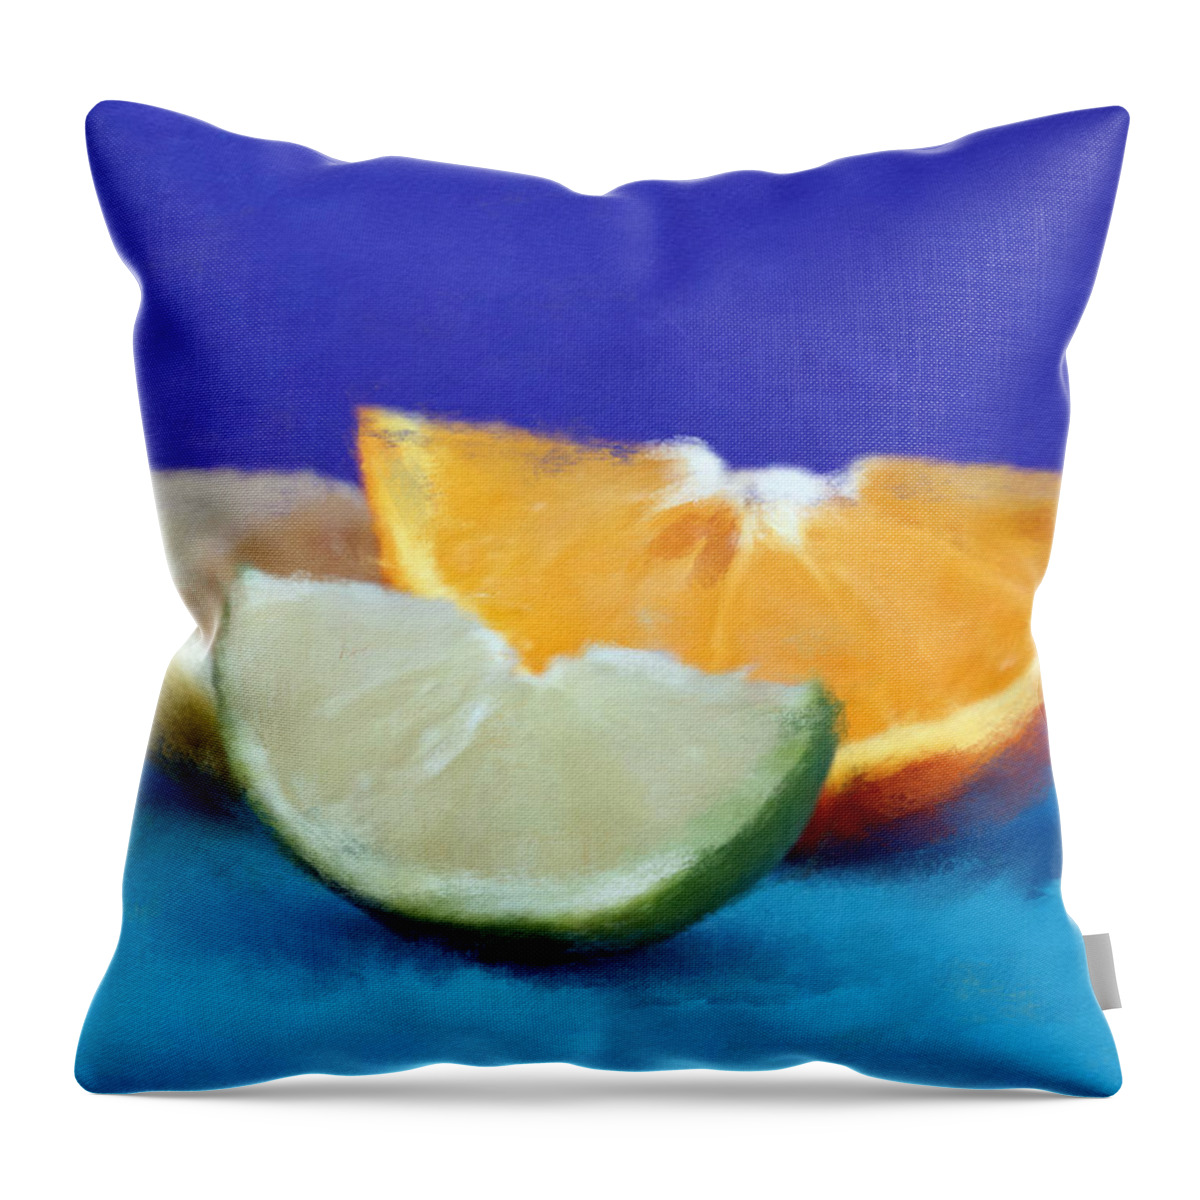 Fruit Throw Pillow featuring the painting Fresh Citrus- Colorful Art by Linda Woods by Linda Woods